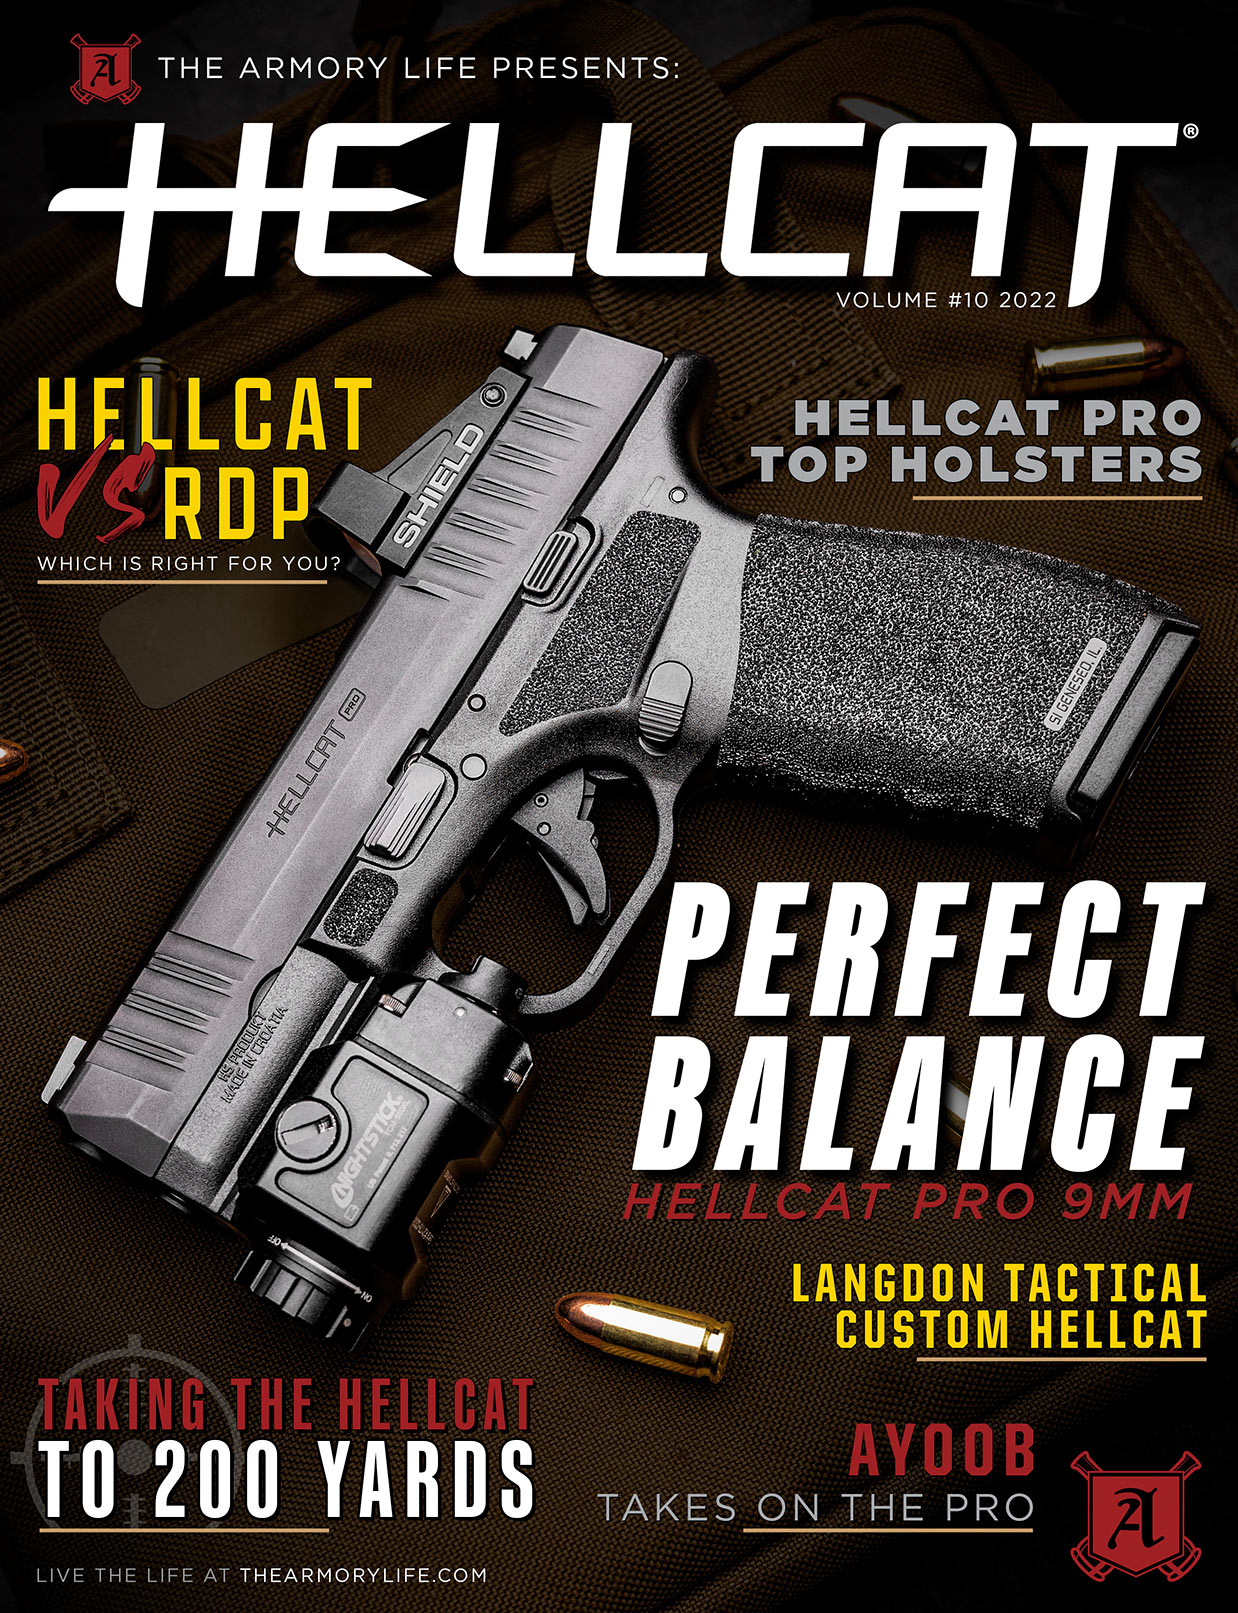 Cover for The Armory Life Digital Magazine Volume 10: Hellcat